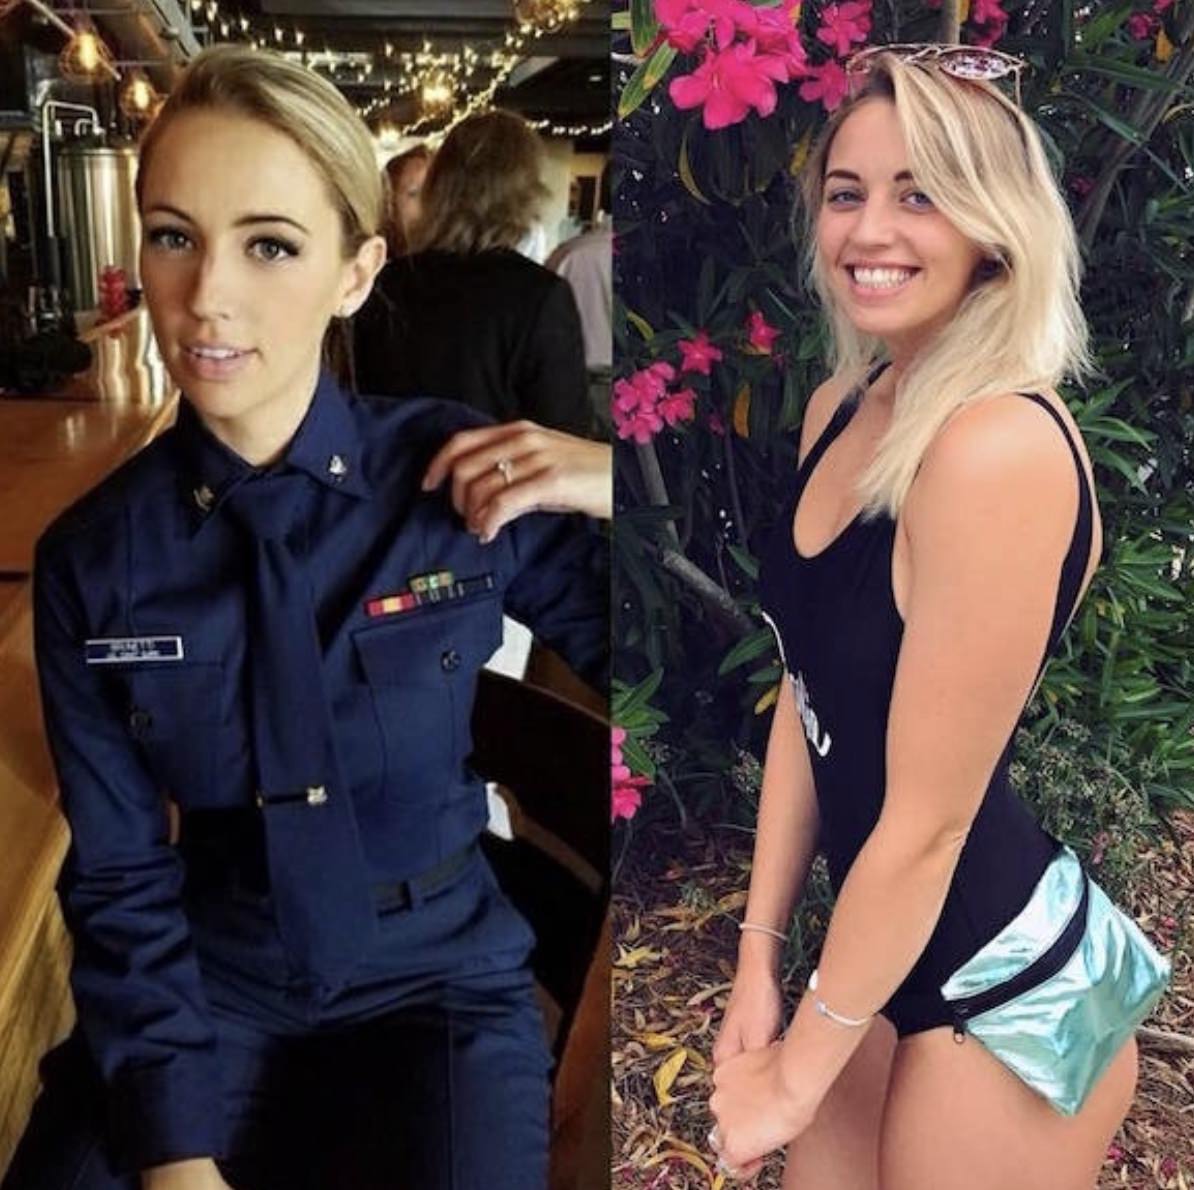 Hot military babe in her dress blues and a photo of her in a one piece smiling